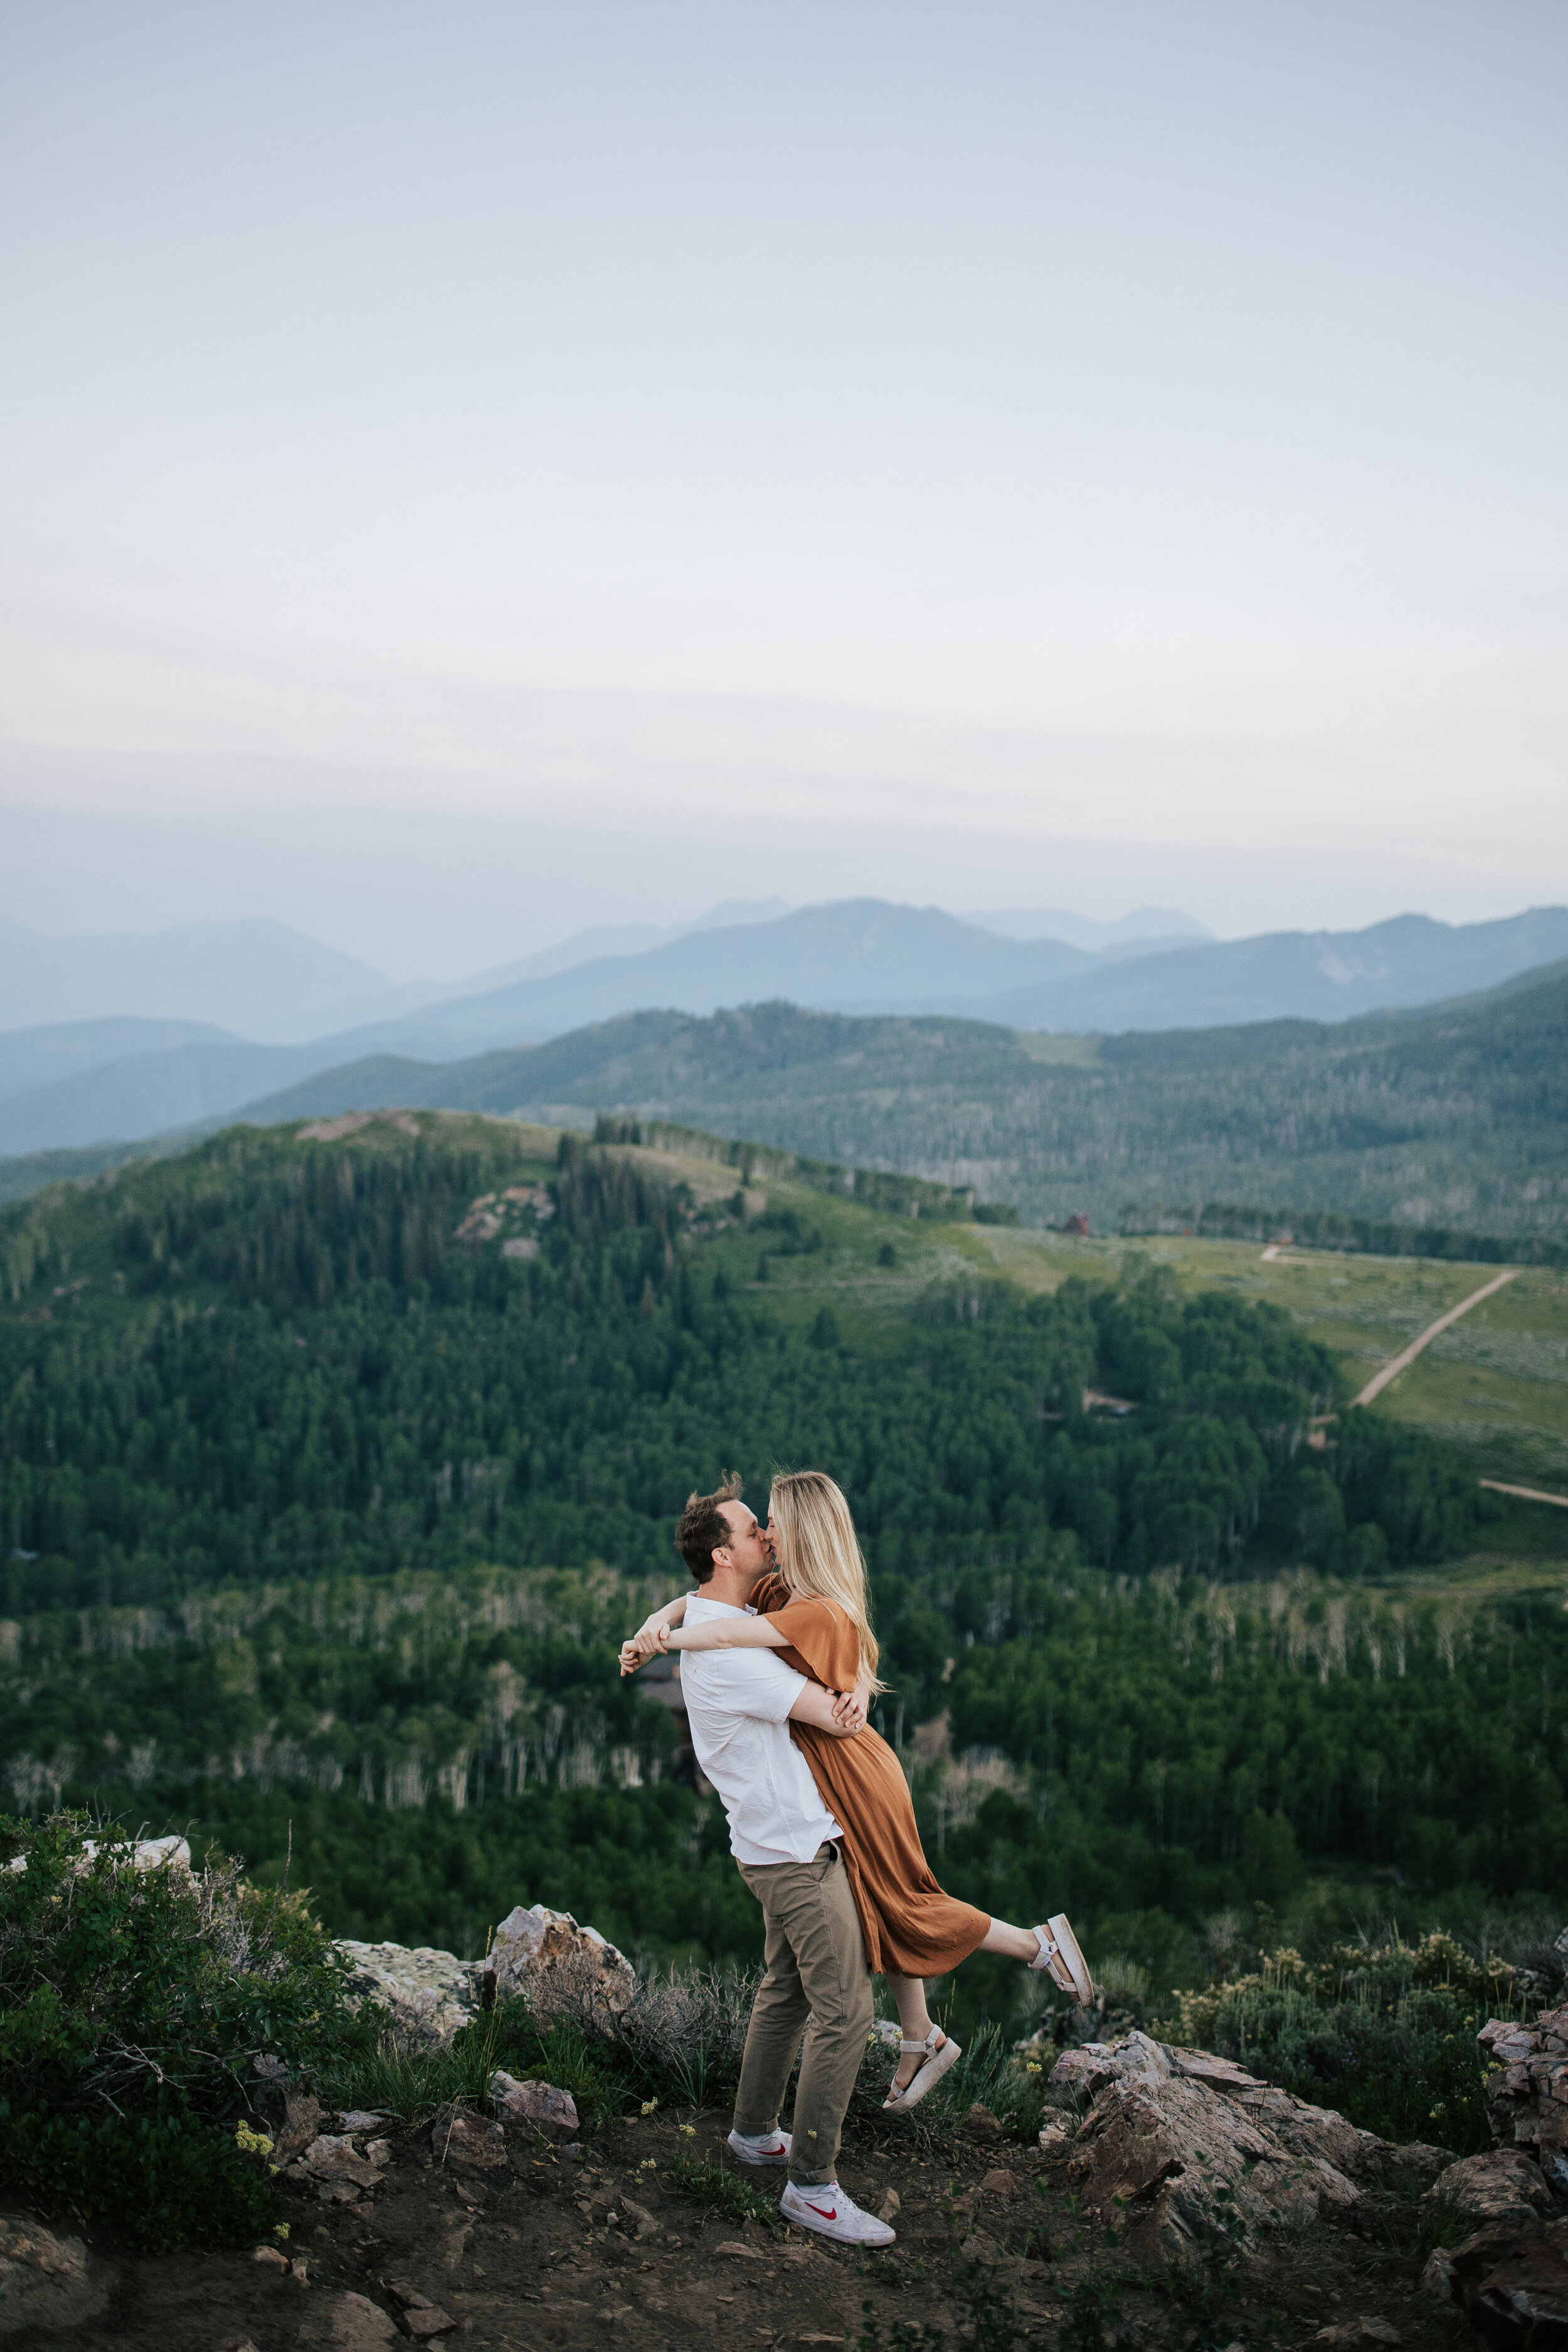  Engagement session in wildflowers in the mountains near Park City, Utah. Summertime engagement photos with mountain views. Engaged couple doing a piggyback ride in the mountains. Outfit inspo. Engagement outfits. Pine trees. #engagementphotos #engag